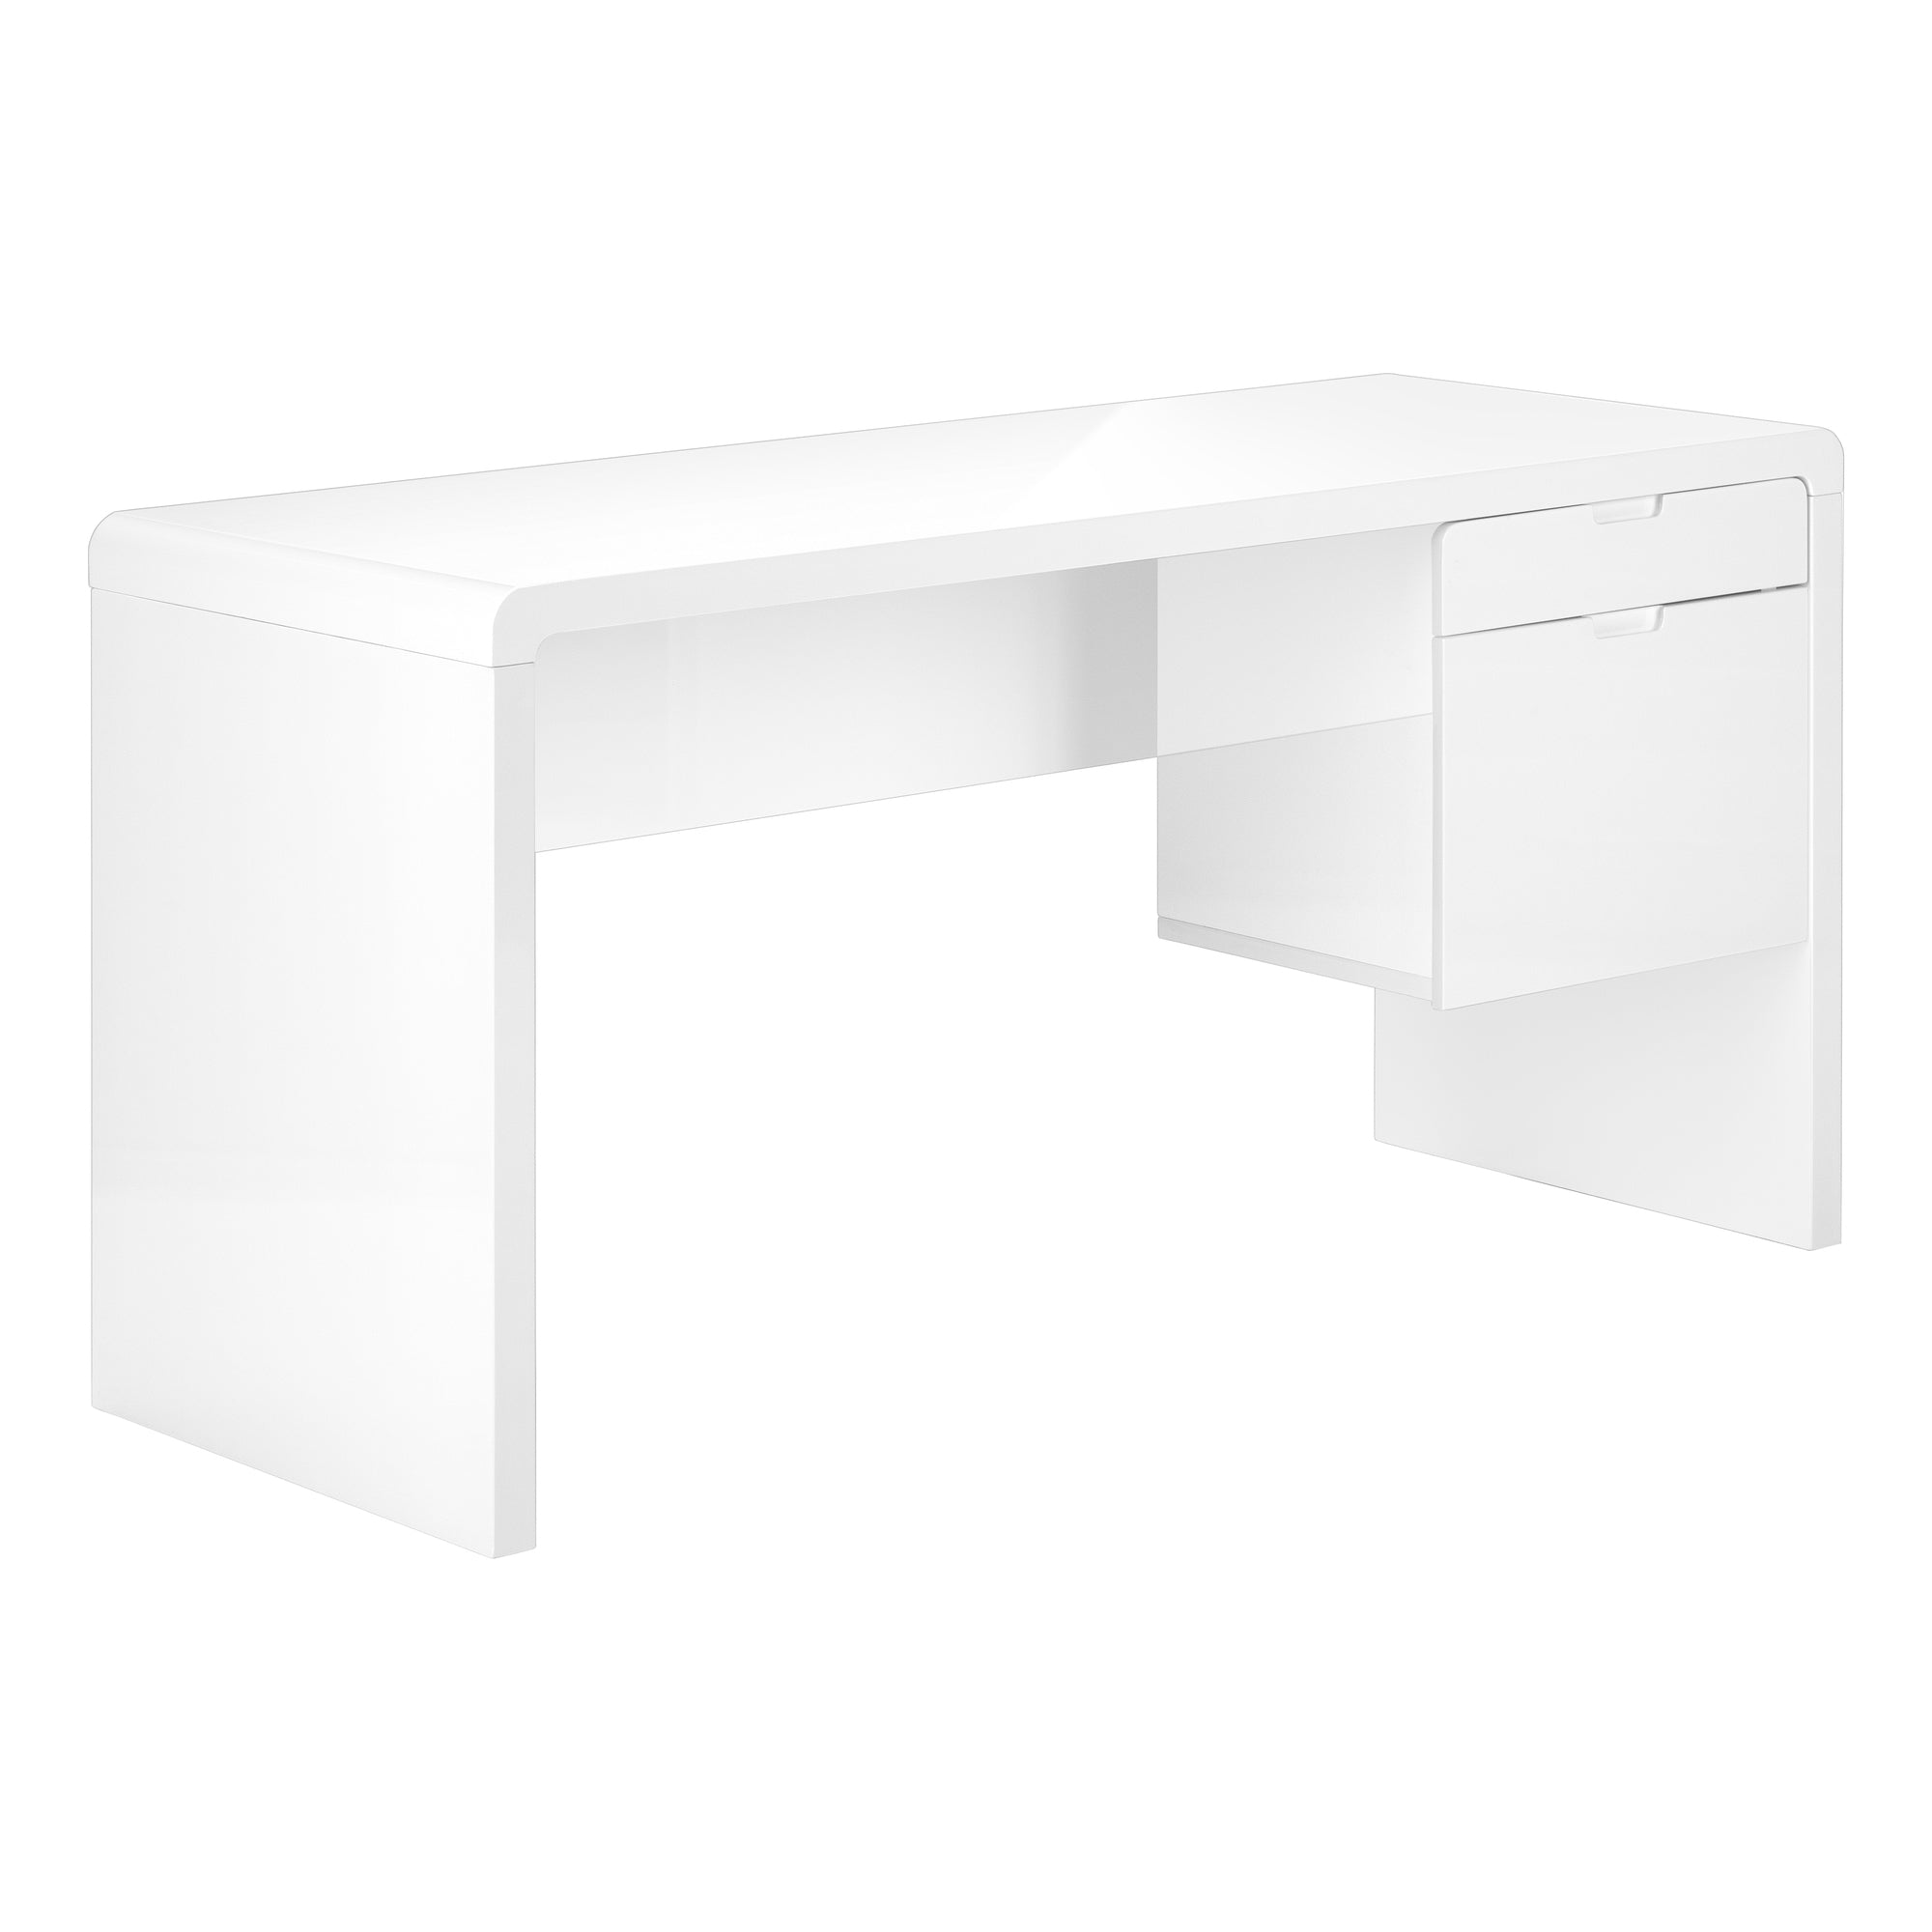 MN-997581    Computer Desk, Home Office, Laptop, Left, Right Set-Up, Storage Drawers, 60"L, Metal, Laminate, Glossy White, Glam, Modern